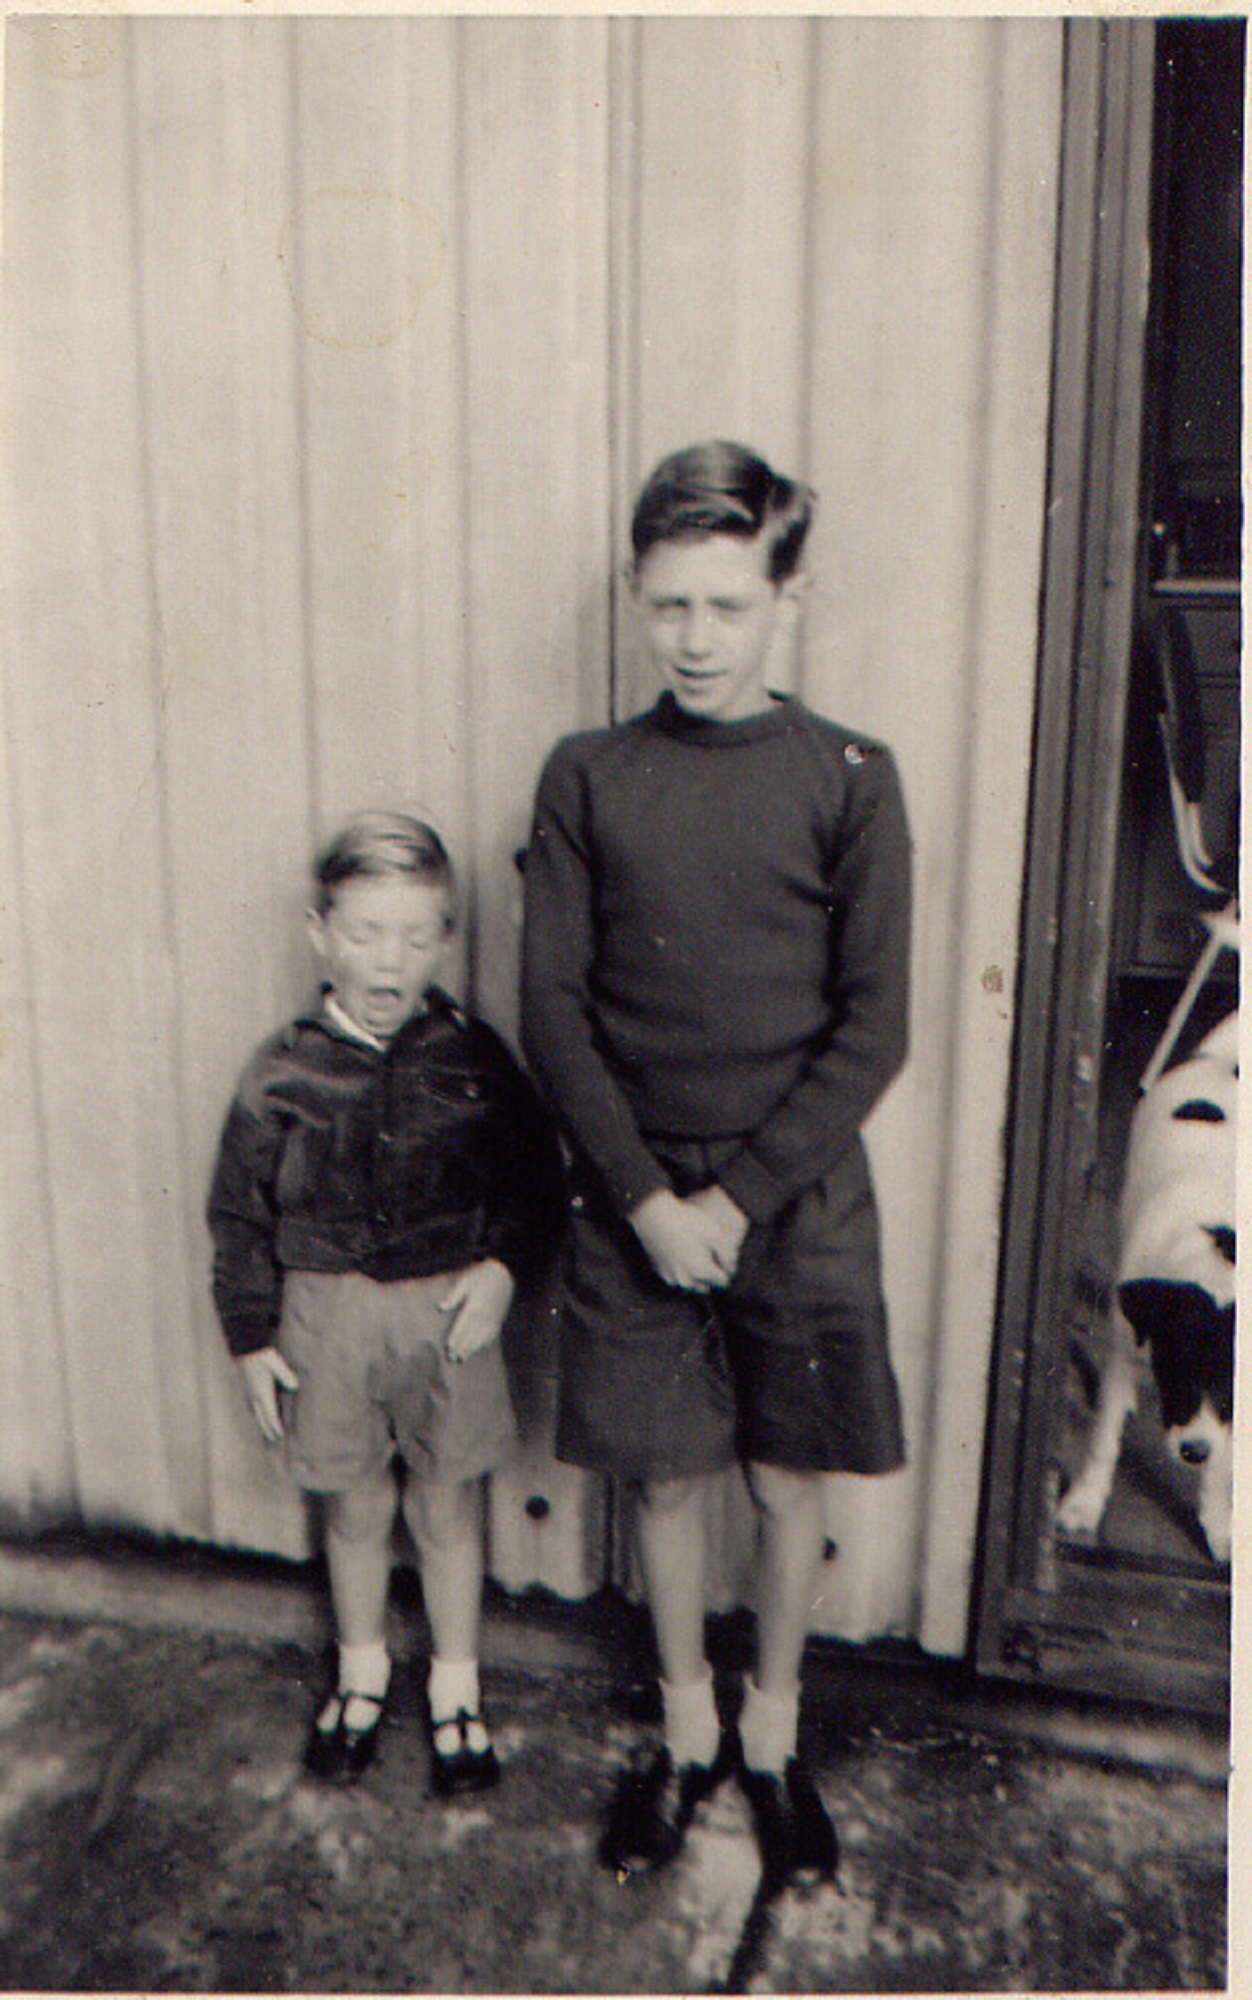 Nick and his brother outside the prefab, Roding Avenue, Barking